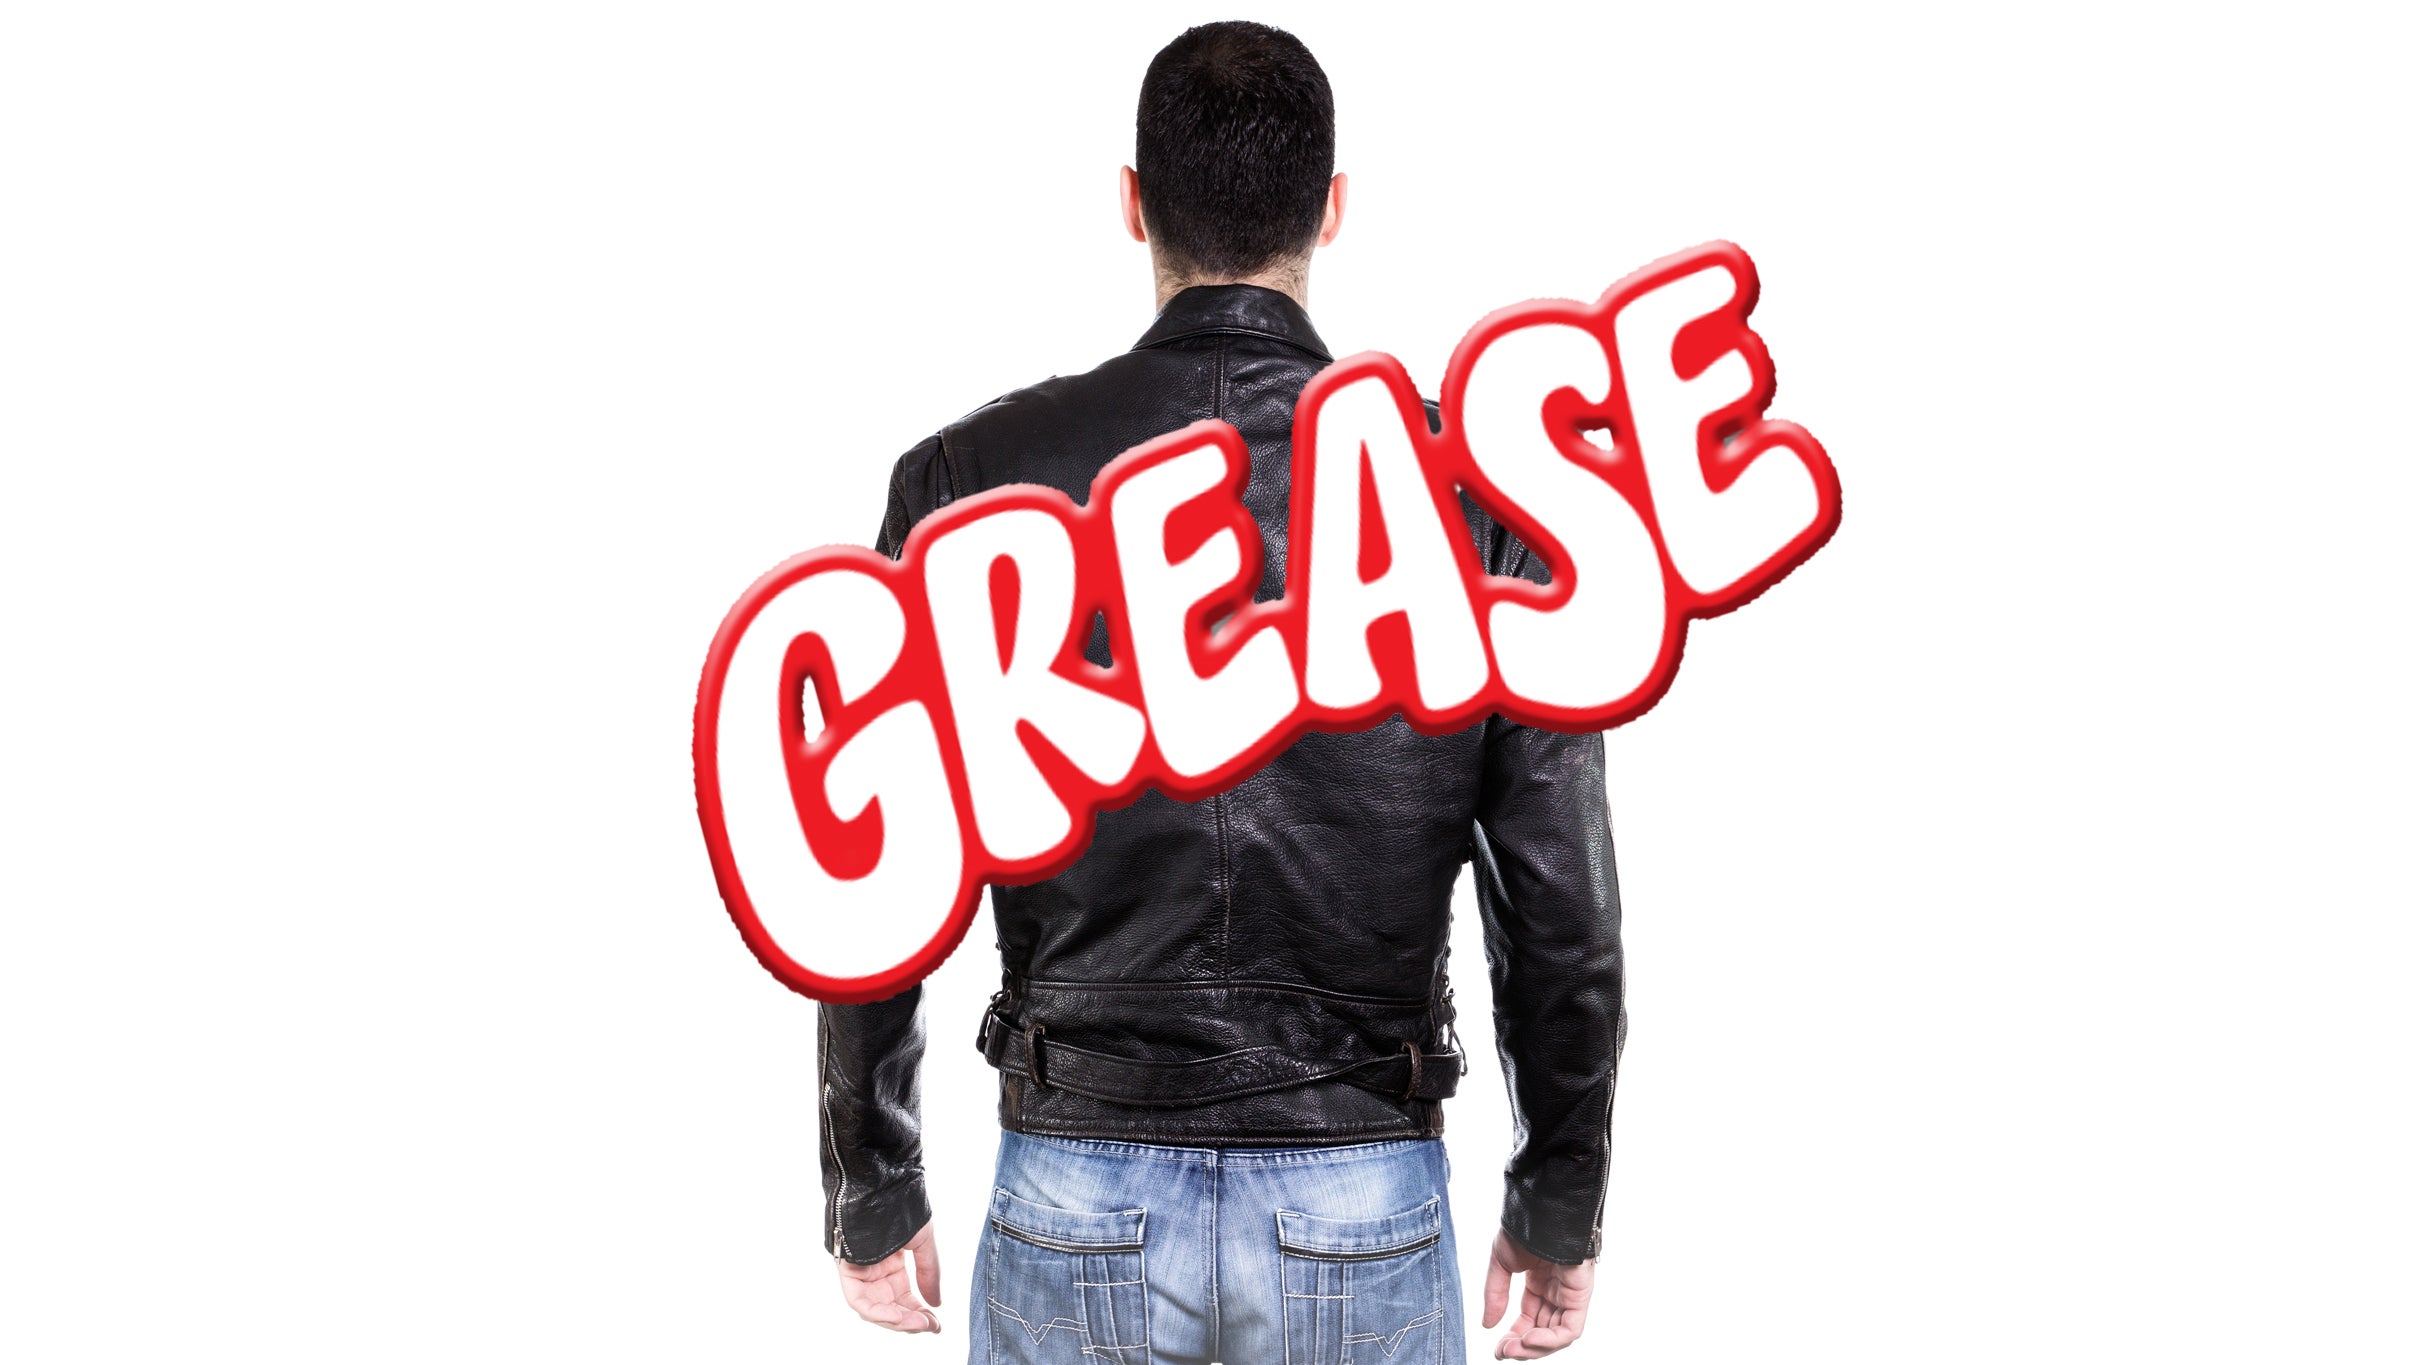 Hard Rock Presents: Grease in Atlantic City promo photo for Ticketmaster Exclusive  presale offer code